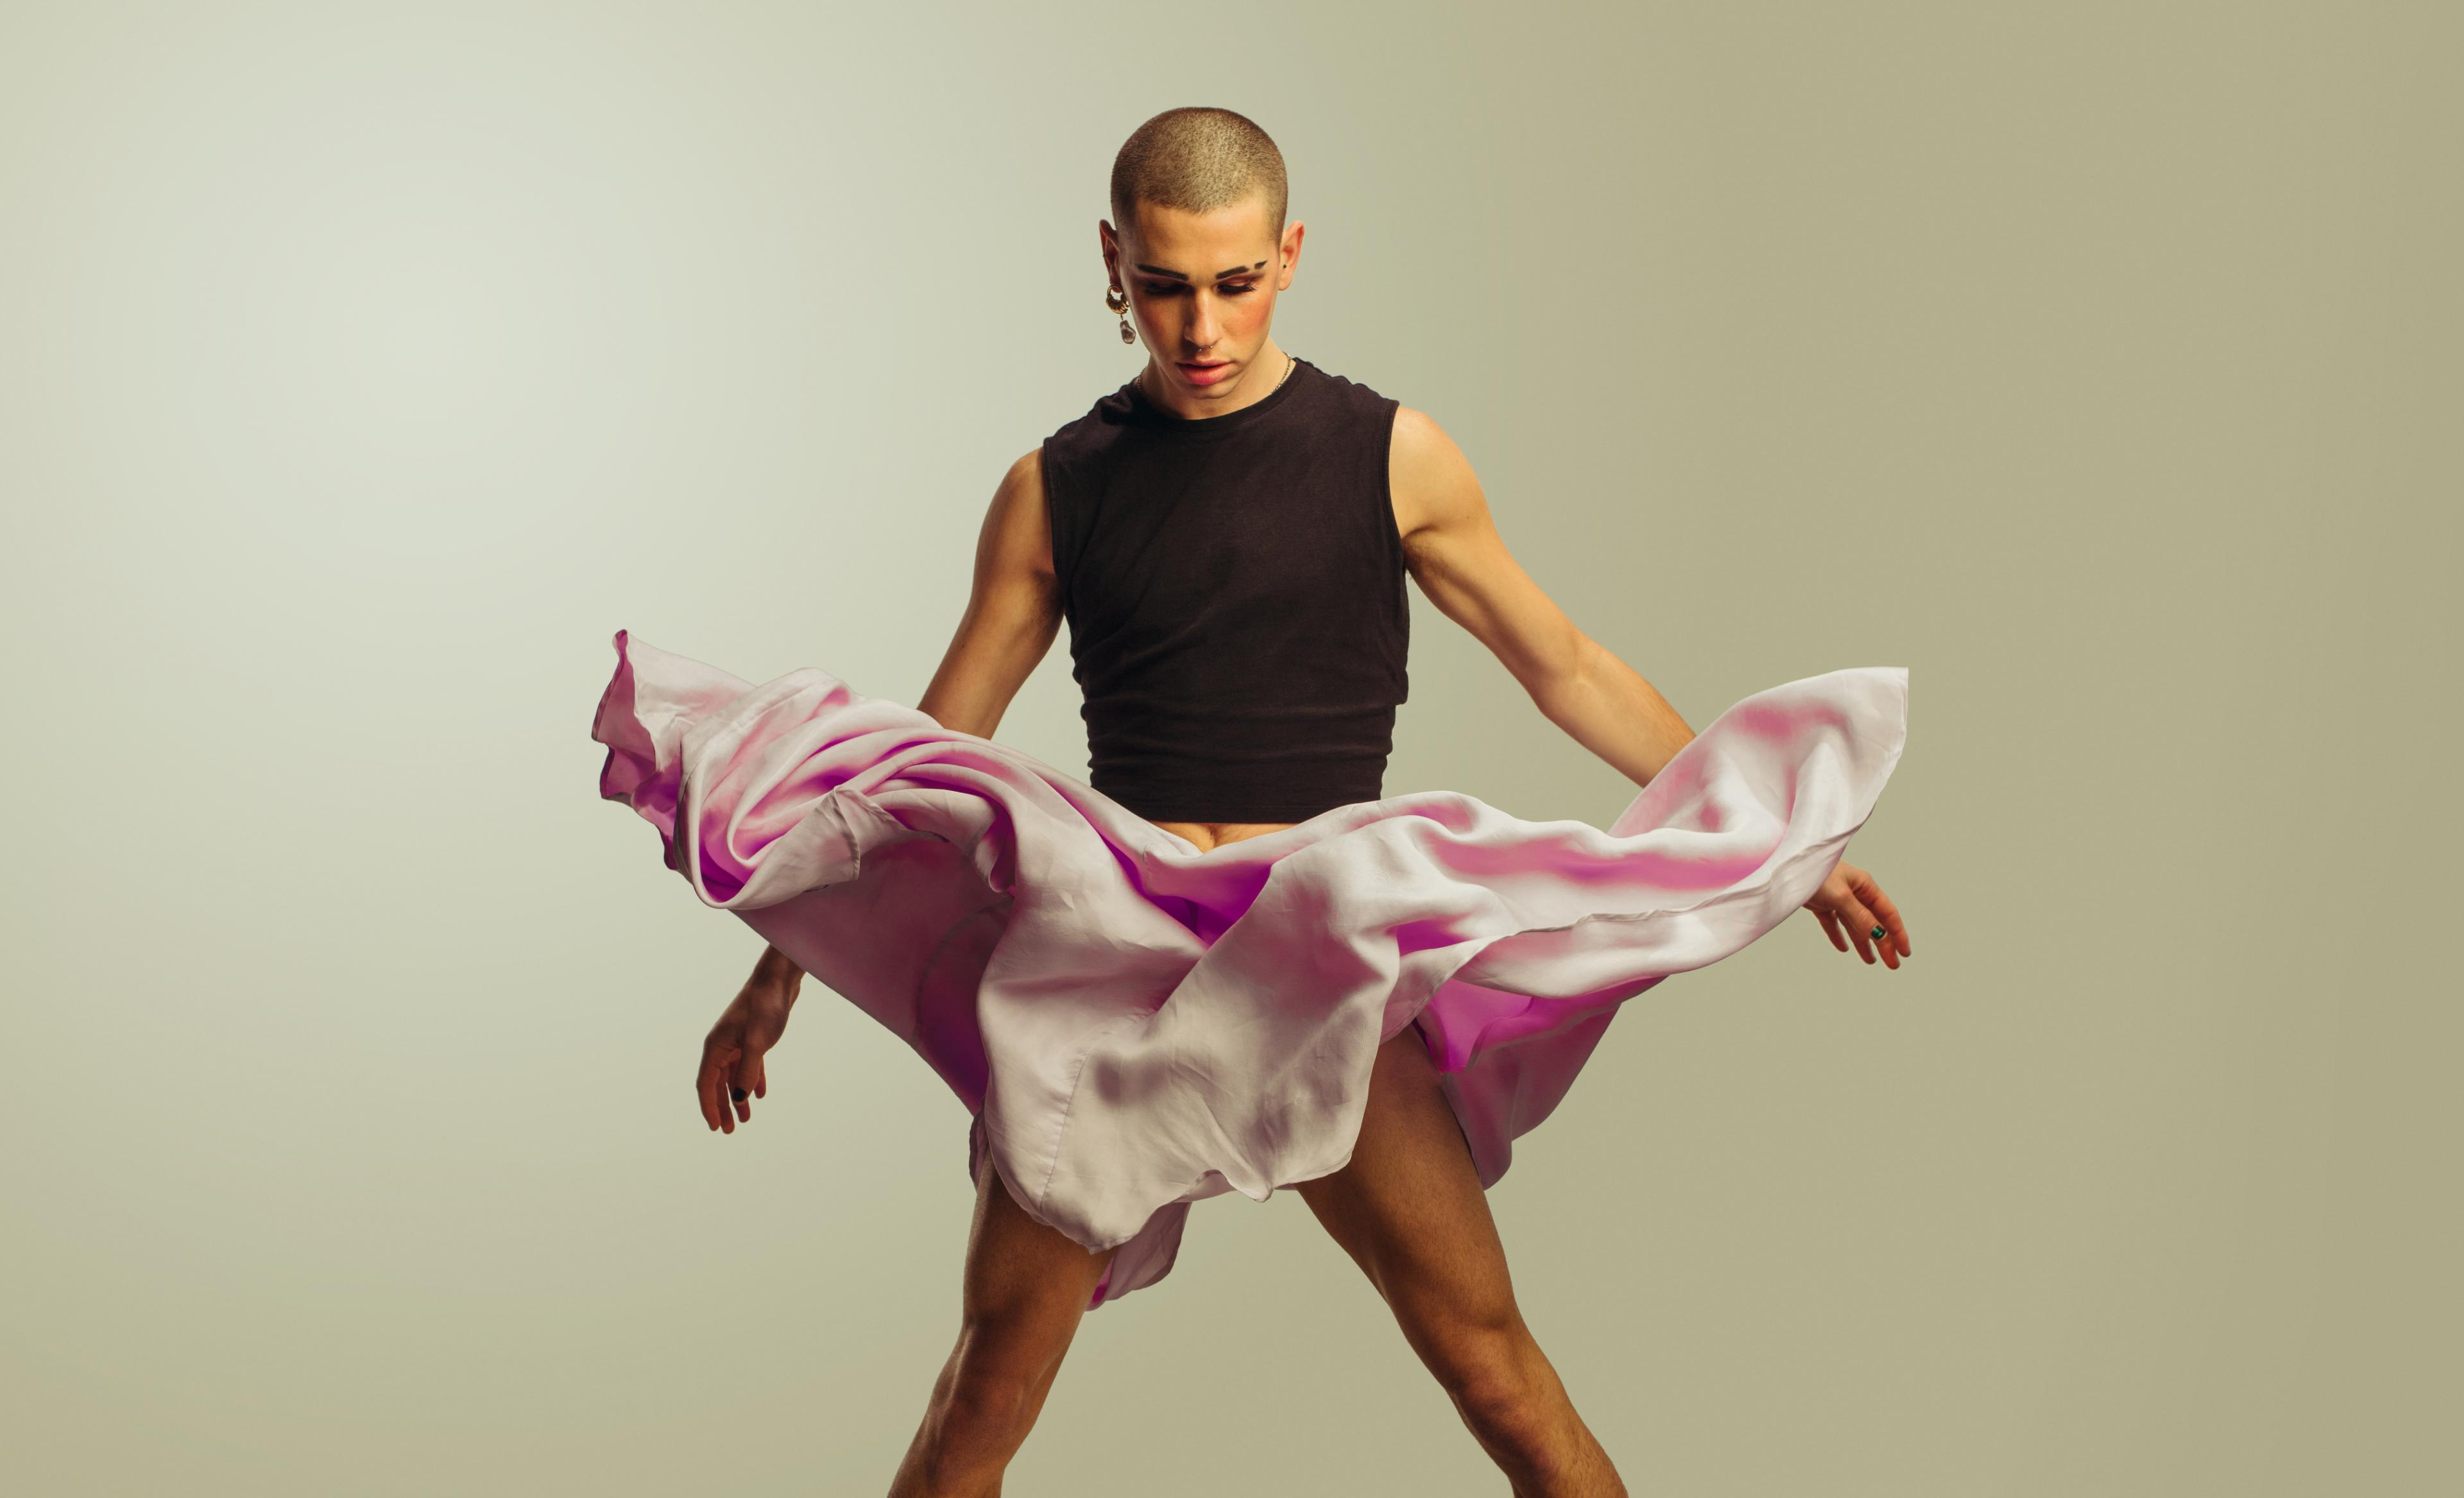 A gender fluid male, with very short hair, an earring, and makeup, with skirt fluttering in air